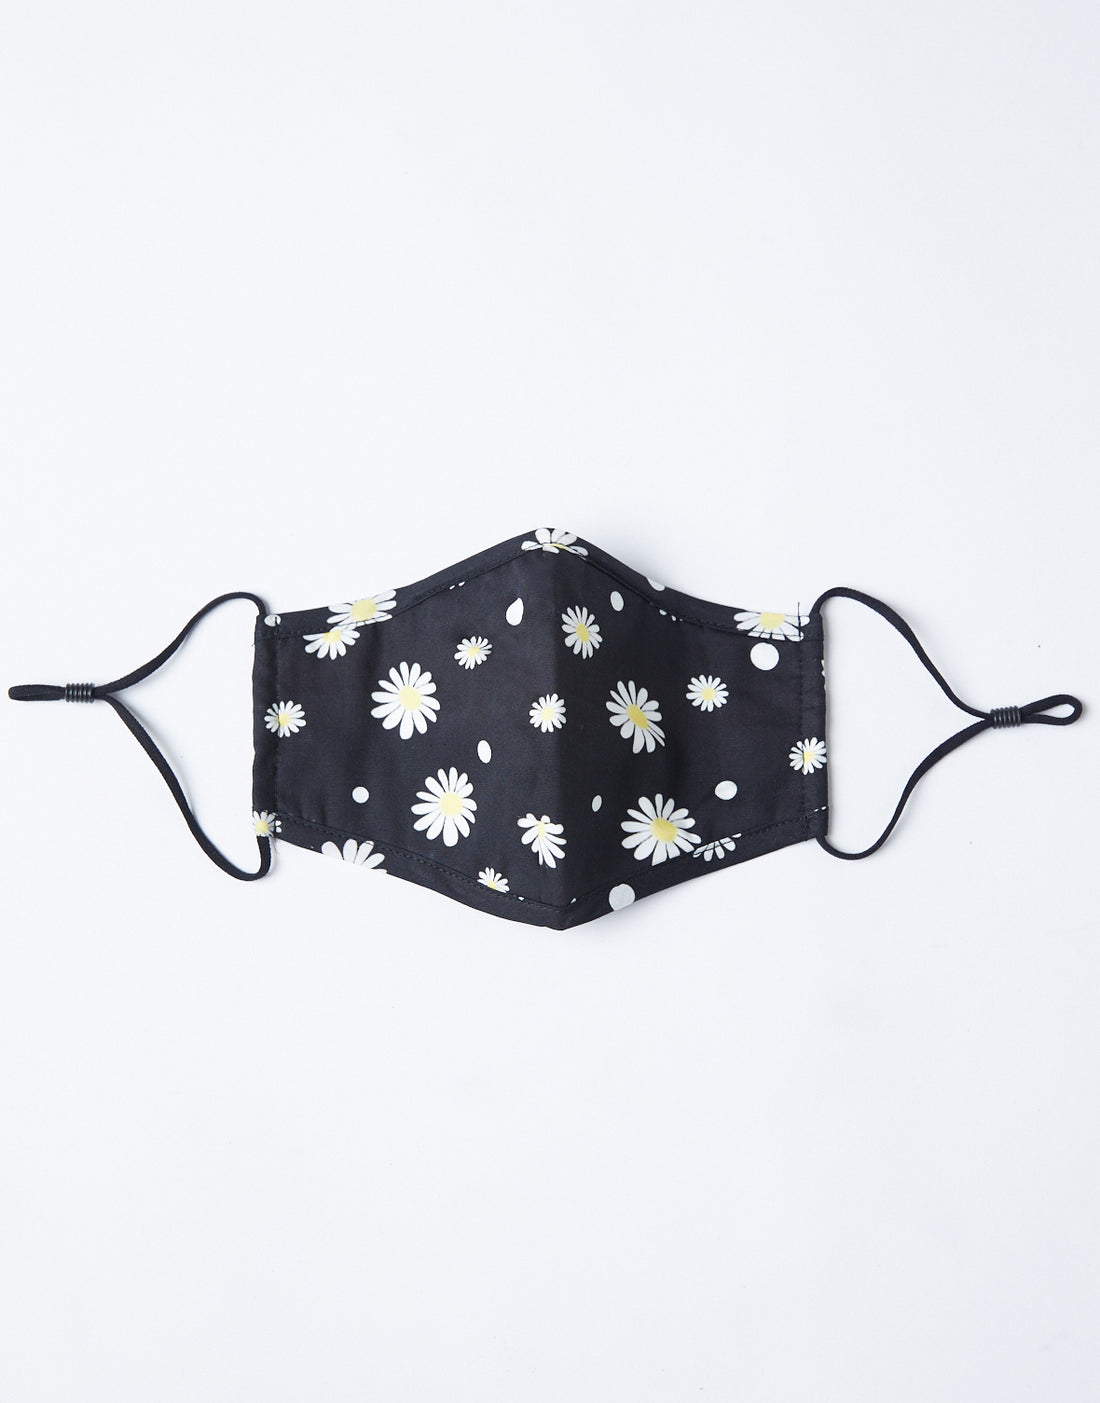 Play It Safe Patterned Mask Accessories Black Daisies One Size -2020AVE